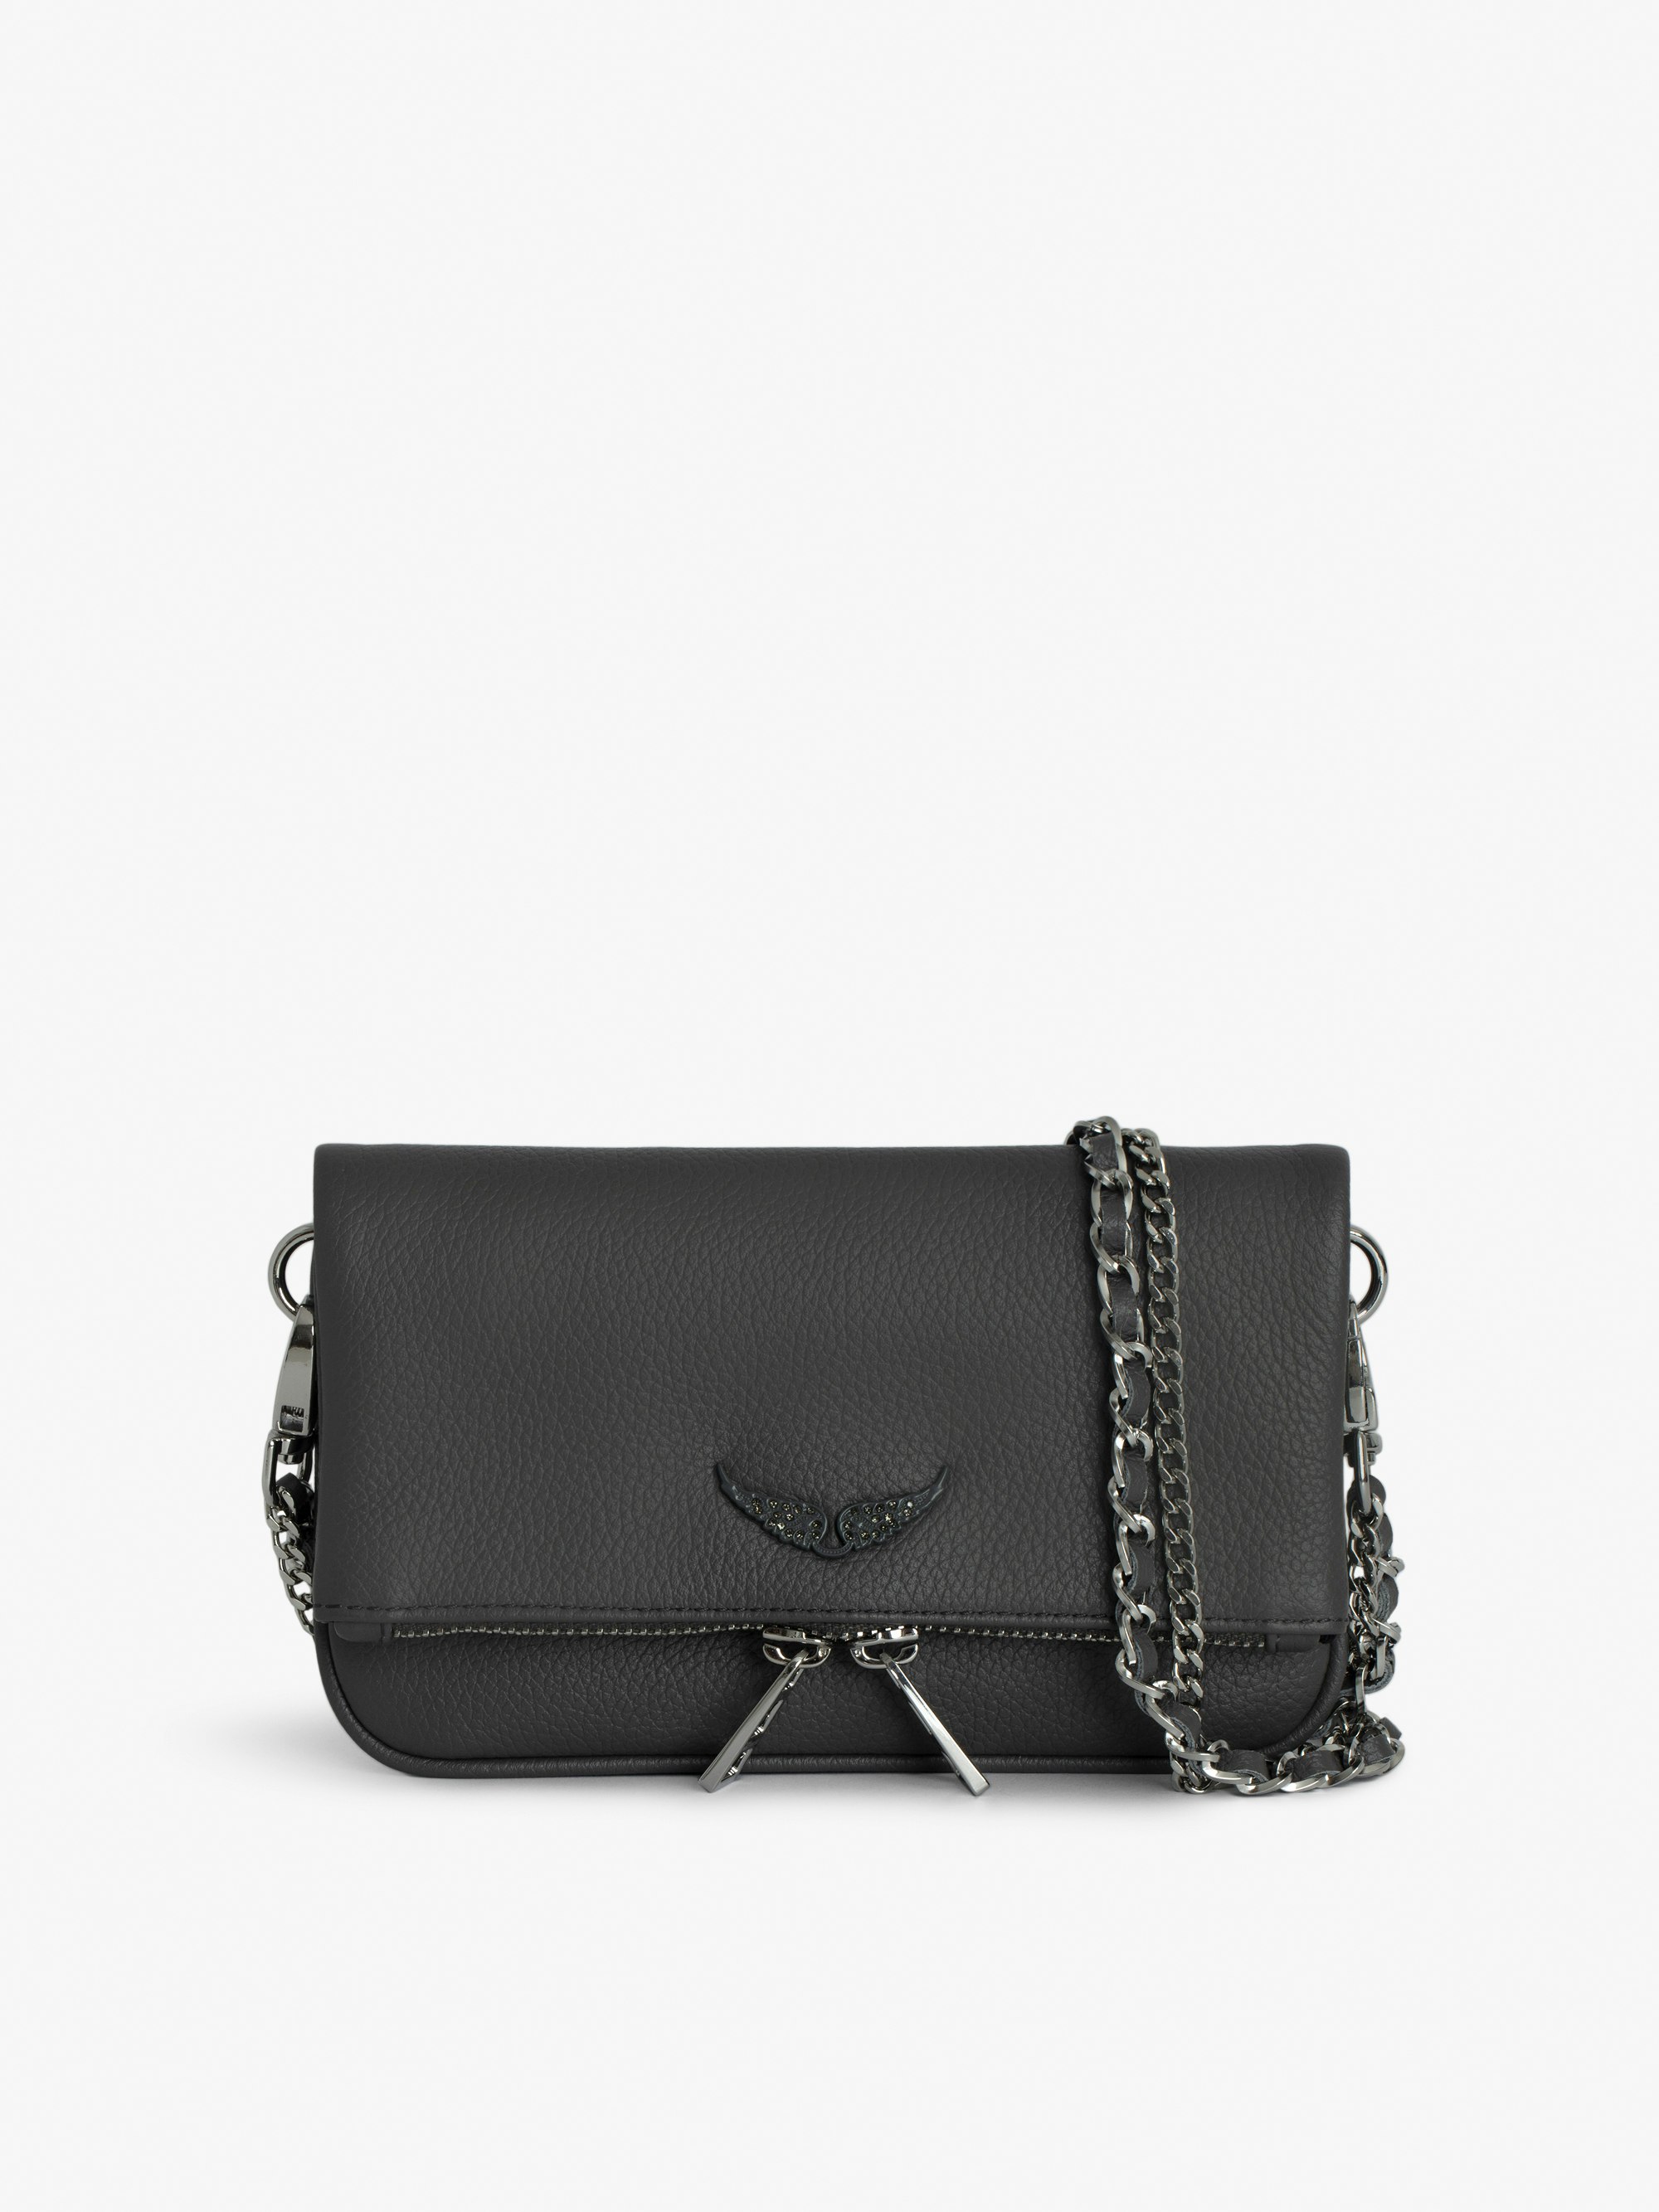 Rock Nano Clutch - Small grained leather clutch with double chain and signature wings.